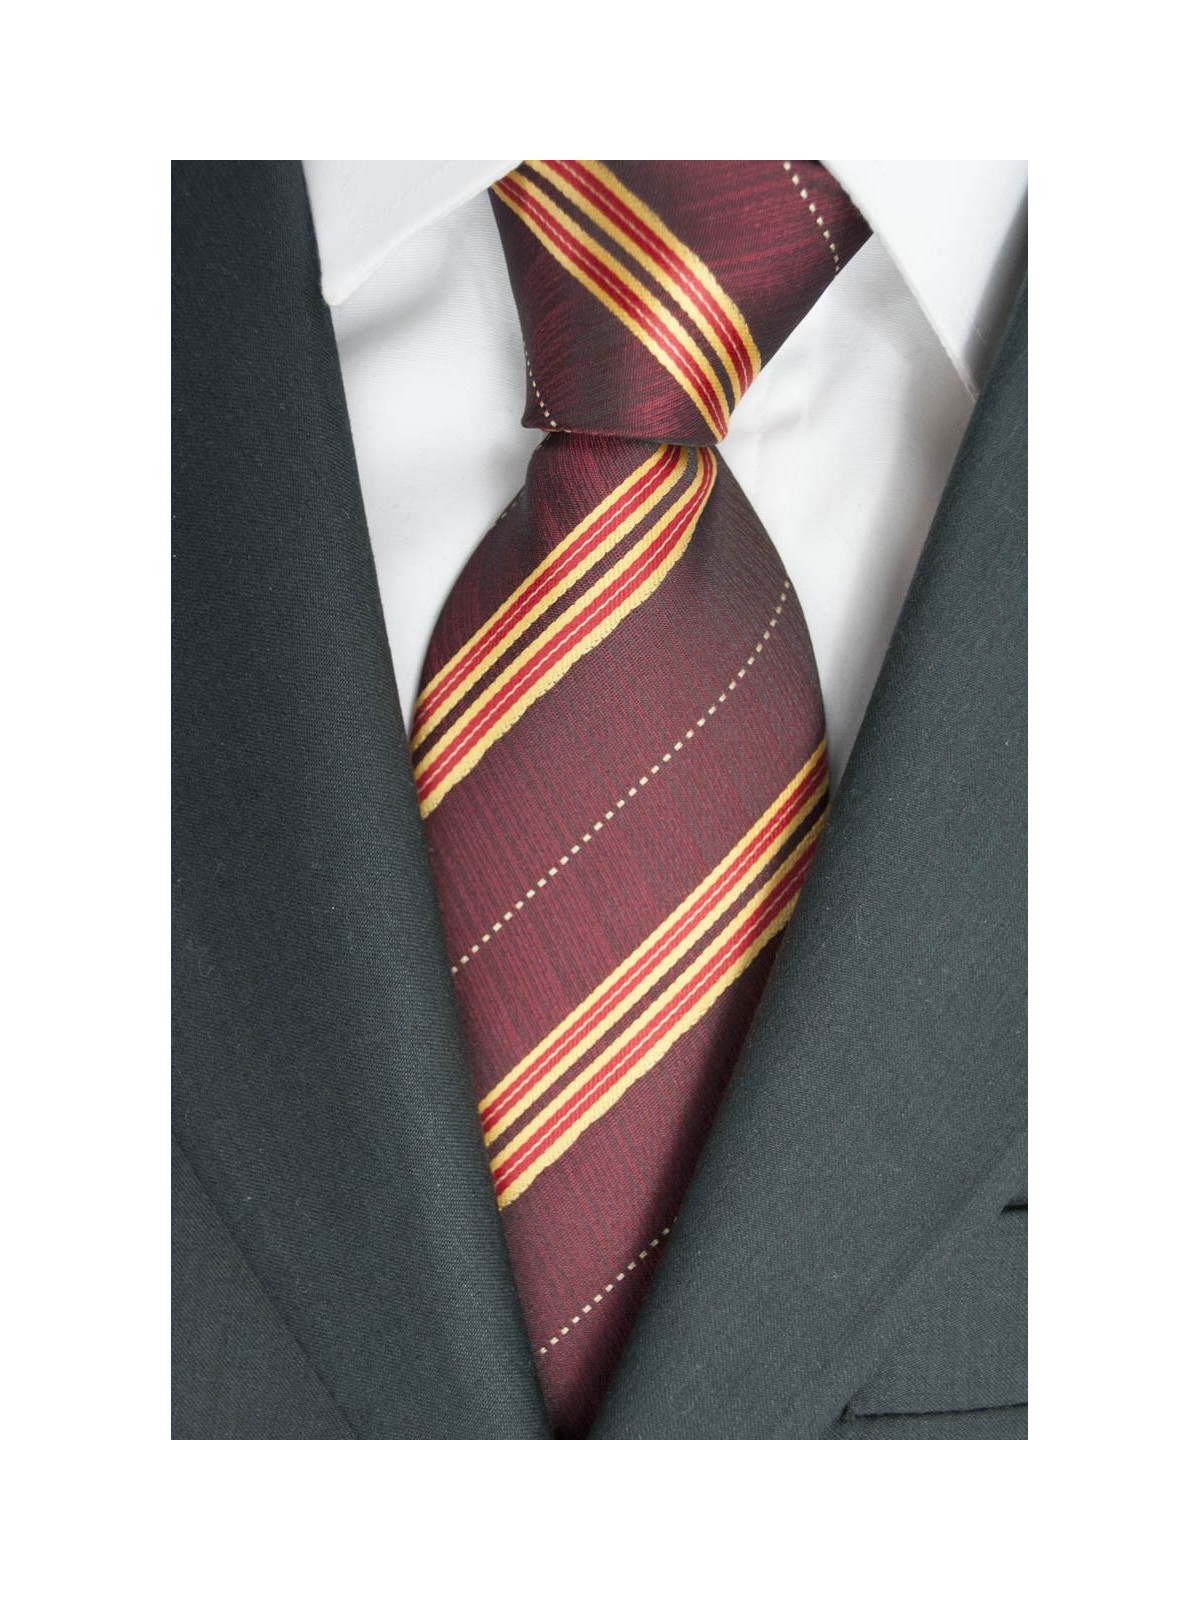 Tie a Large Red Regimental - Yellow 100% Pure Silk - Made in Italy